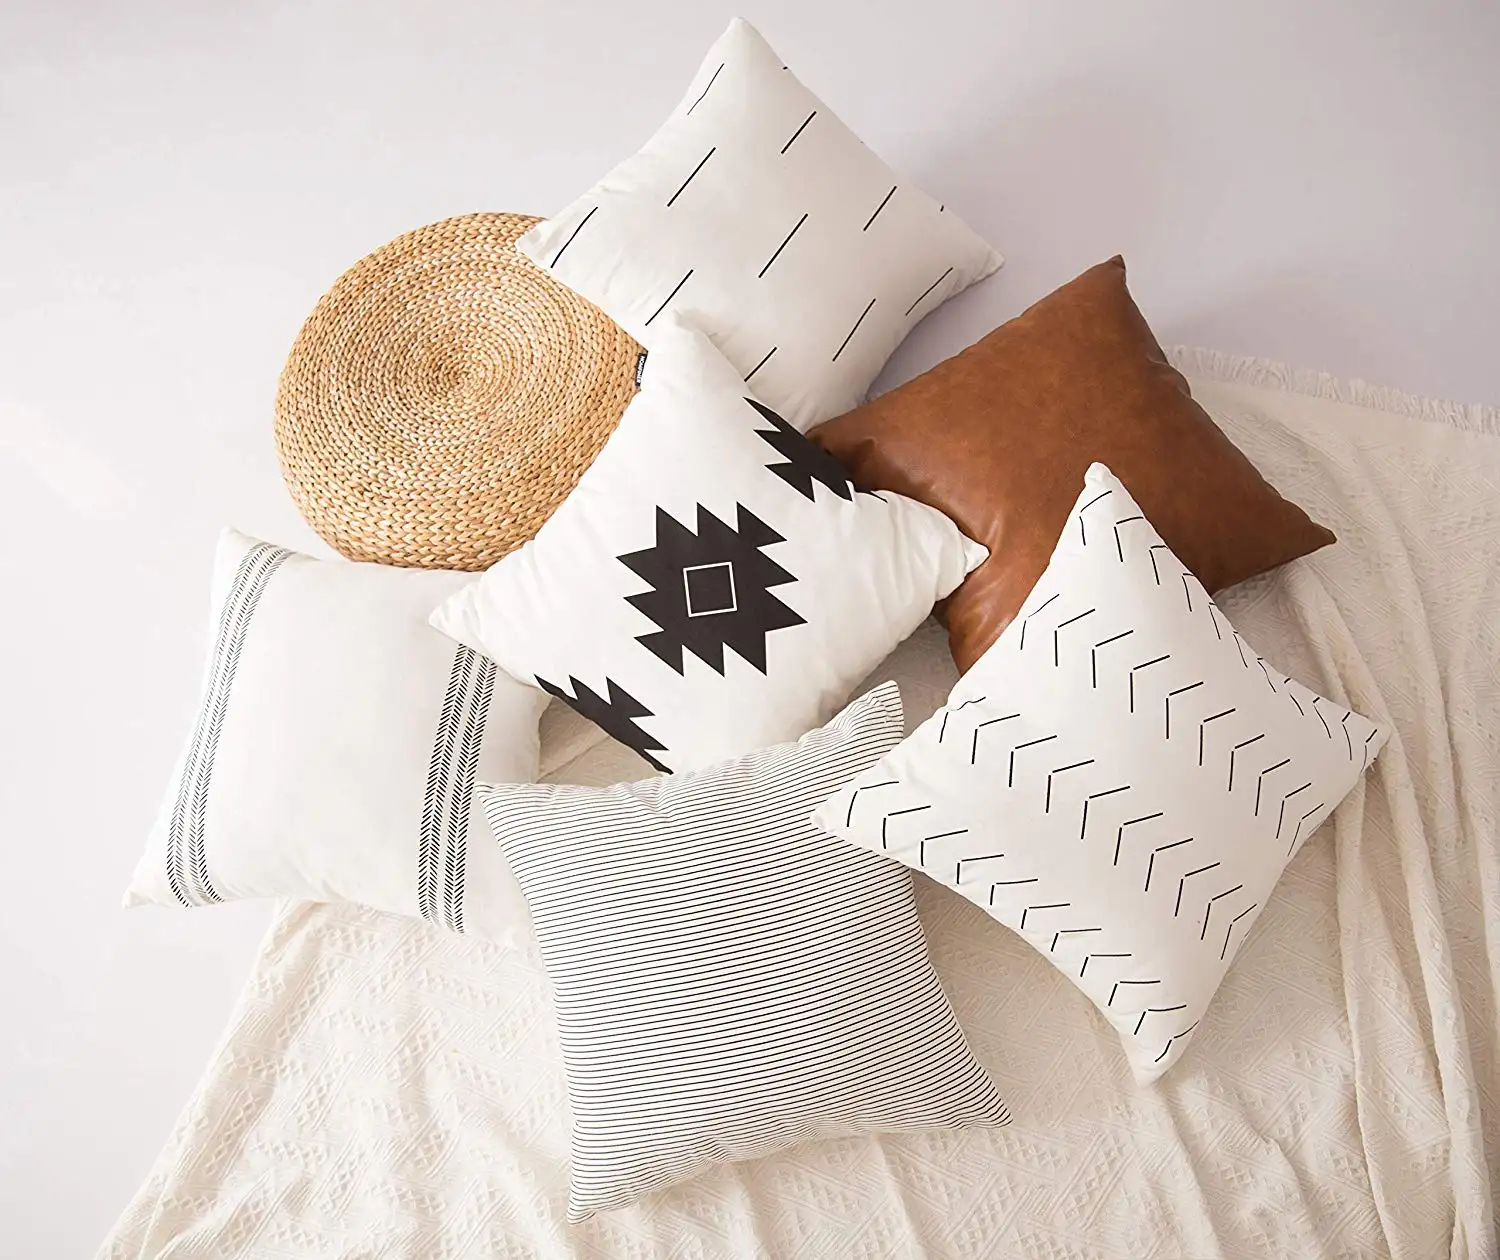 Square Cotton Pillow Covers Home Decorative Throw Cushion Cover Sets Geometric Patterns Pillow Cases for Sofa